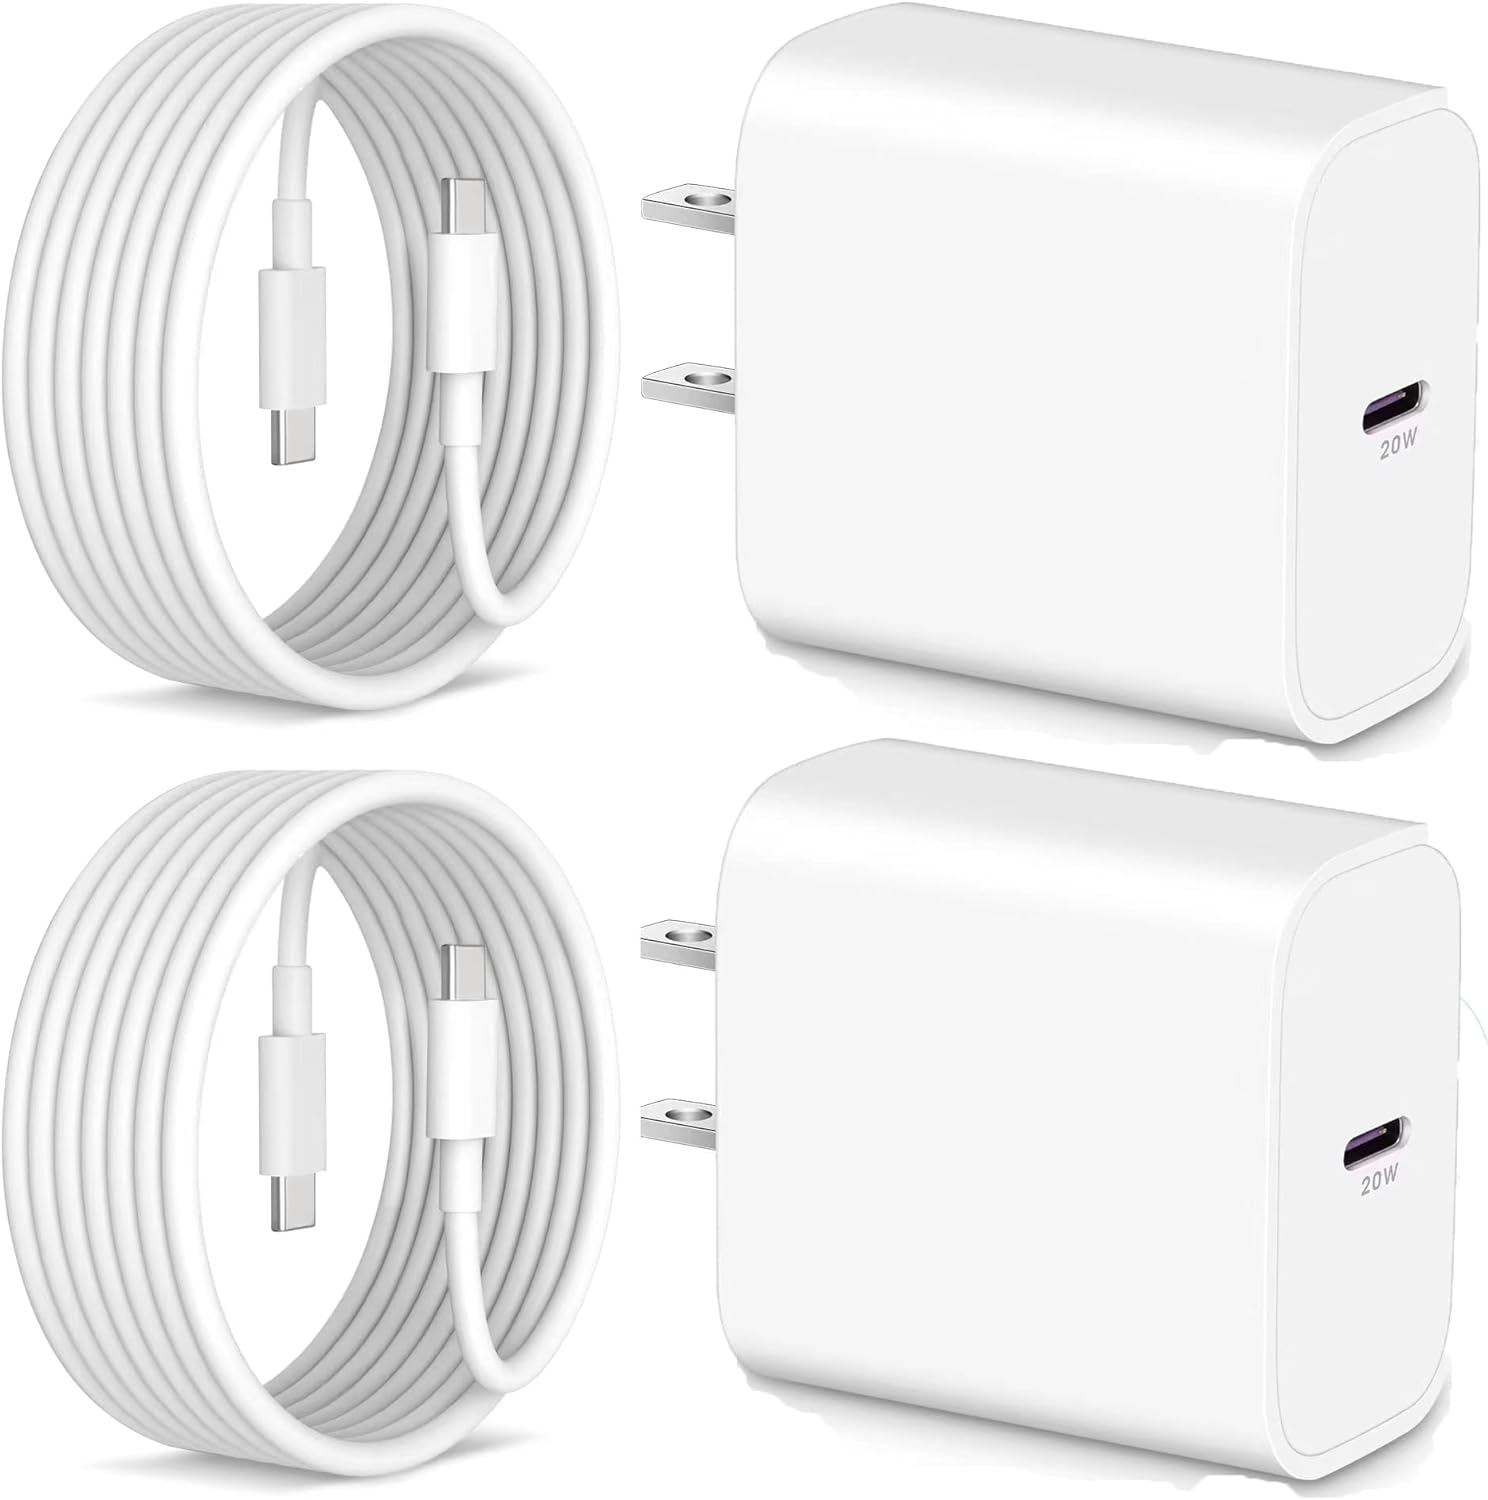 iPhone 15/15 Pro Max Charger, 2Pack 20W Fast USB C Wall Charger Block Plug Power Adapter with 60W/3A 10FT Long USB C to C Cable for iPhone 15/15 Plus/15 Pro/15 Pro Max, iPad Pro/Air/Mini, AirPods Pro